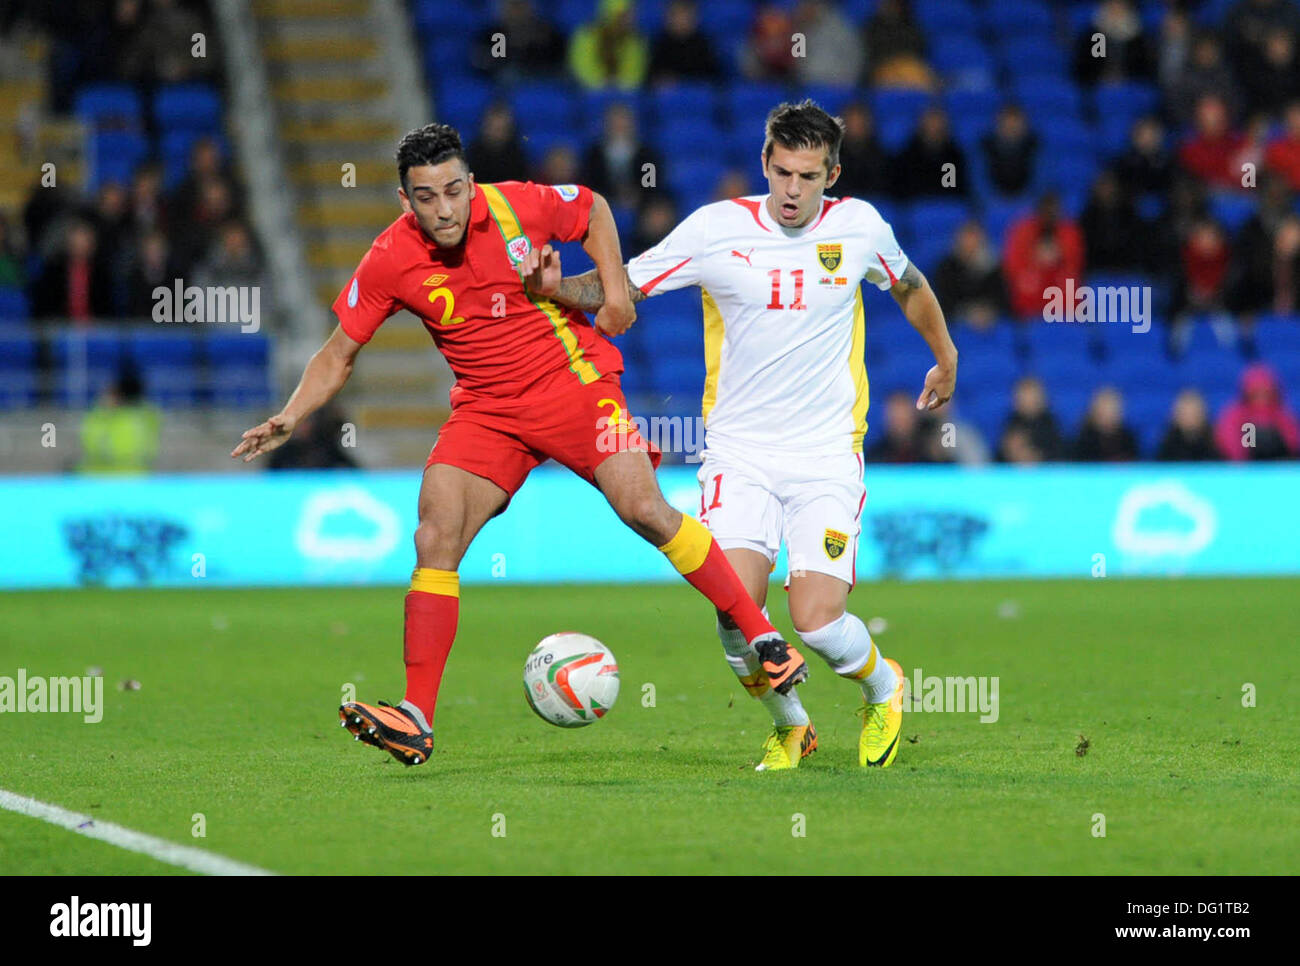 Cardiff, Wales, UK. 11th Oct, 2013. FIFA 2014 World Cup Qualifying Match - Wales v Macedonia at the Cardiff City Stadium : Neil Taylor of Wales is tackled by Aleksander Trajkovski of Macedonia. Credit:  Phil Rees/Alamy Live News Stock Photo